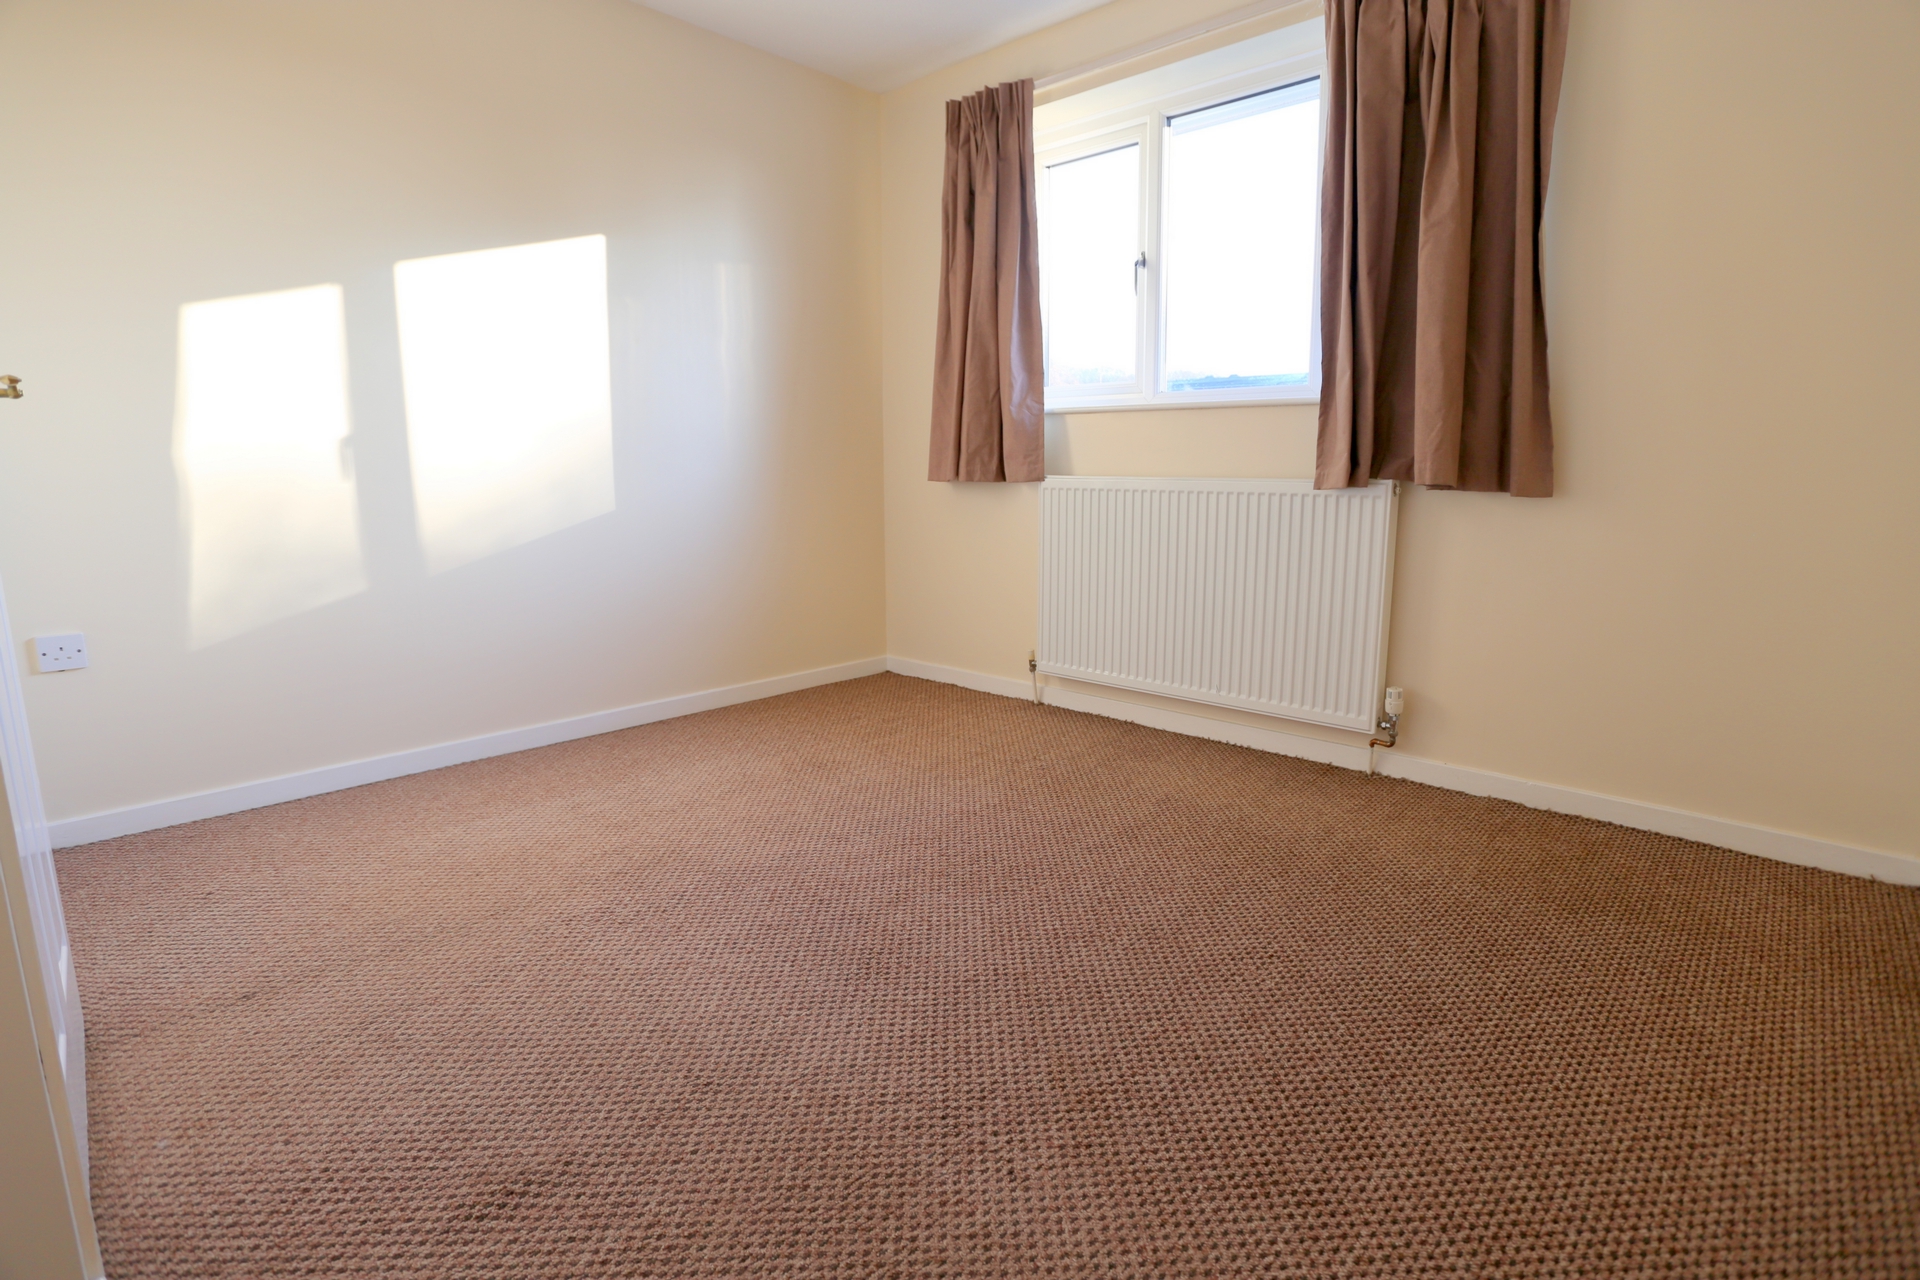 2 bedrooms semi detached, 5 Waterbeck Grove Trentham Stoke-On-Trent Staffs